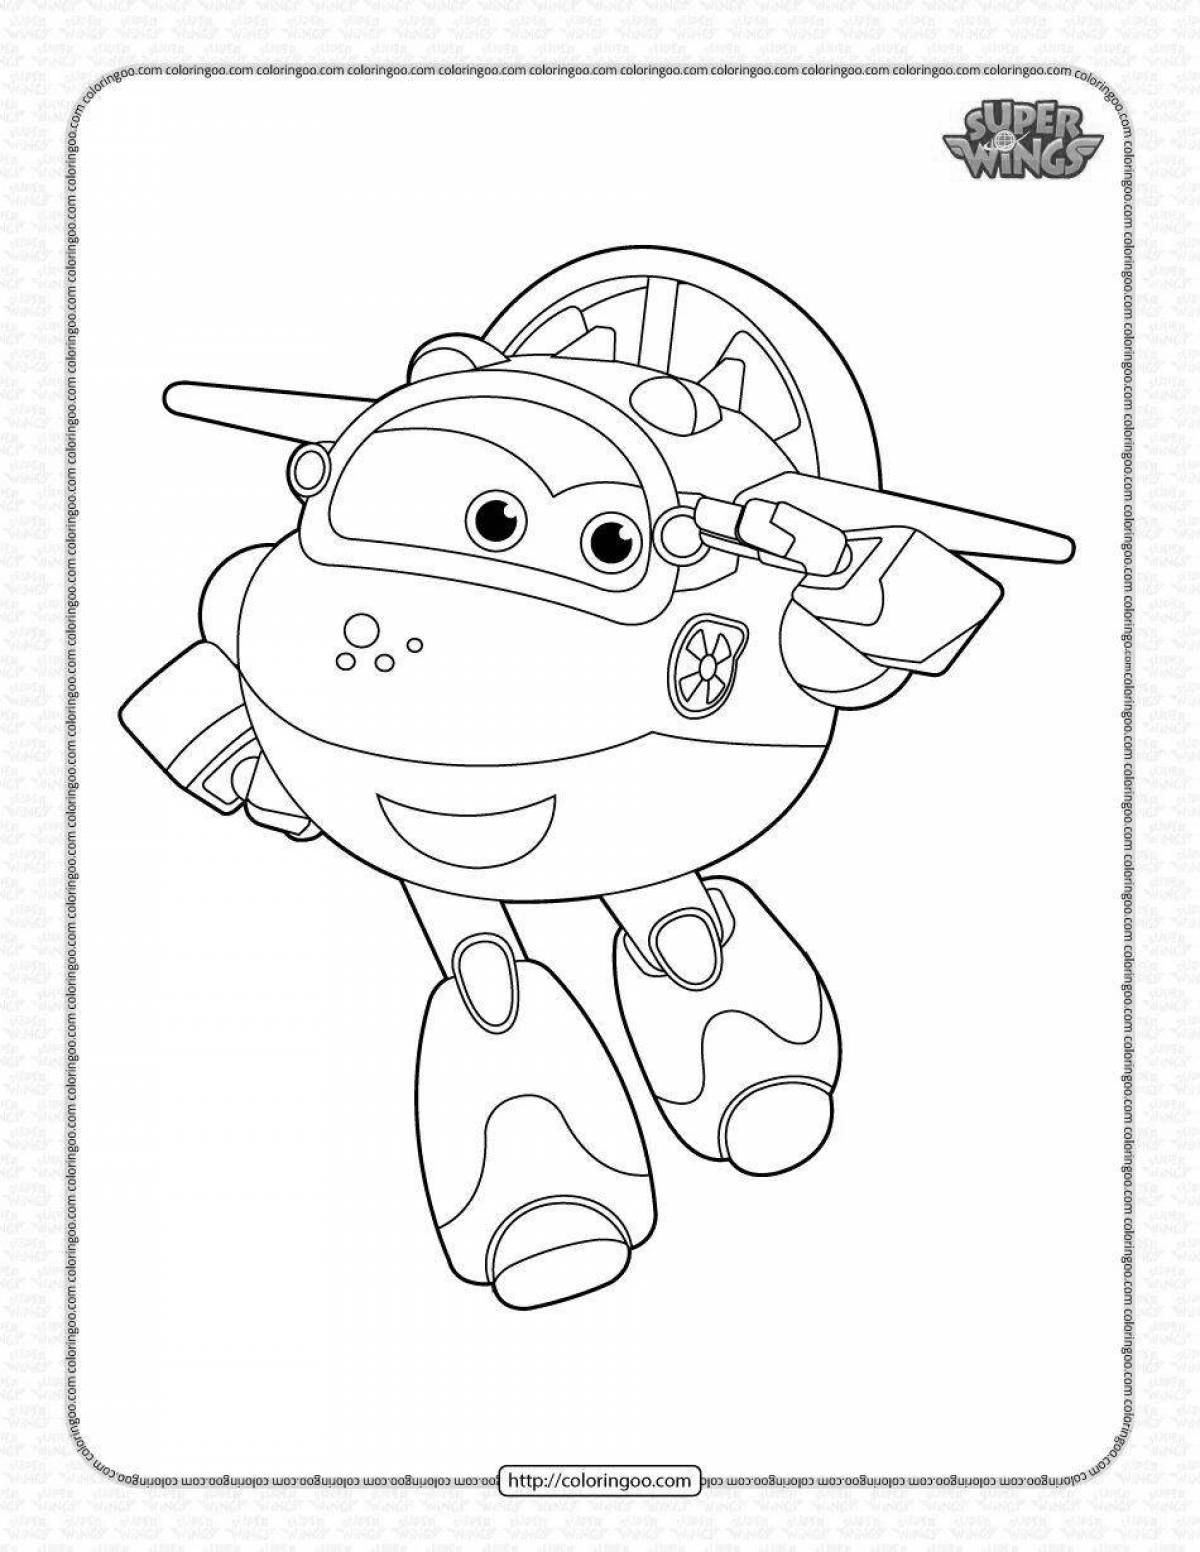 Tempting coloring super wings astra